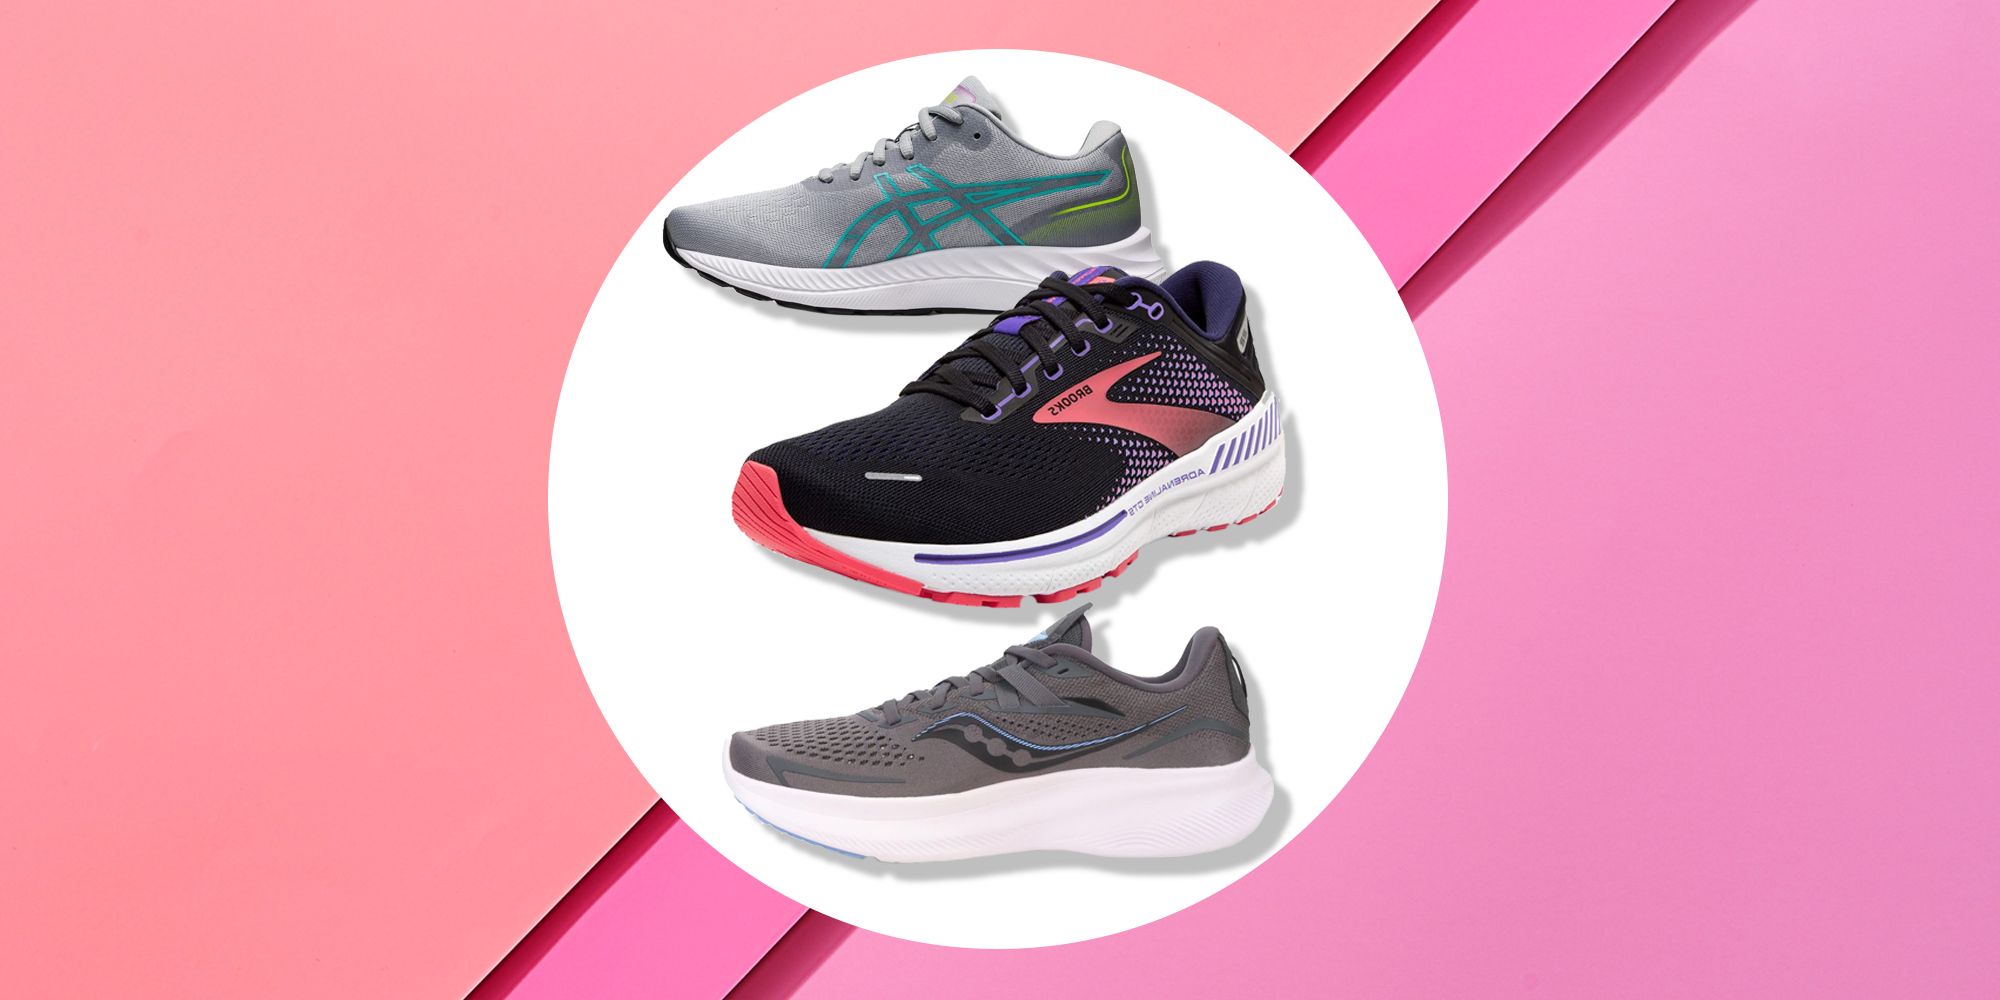 Best affordable New Balance running shoes